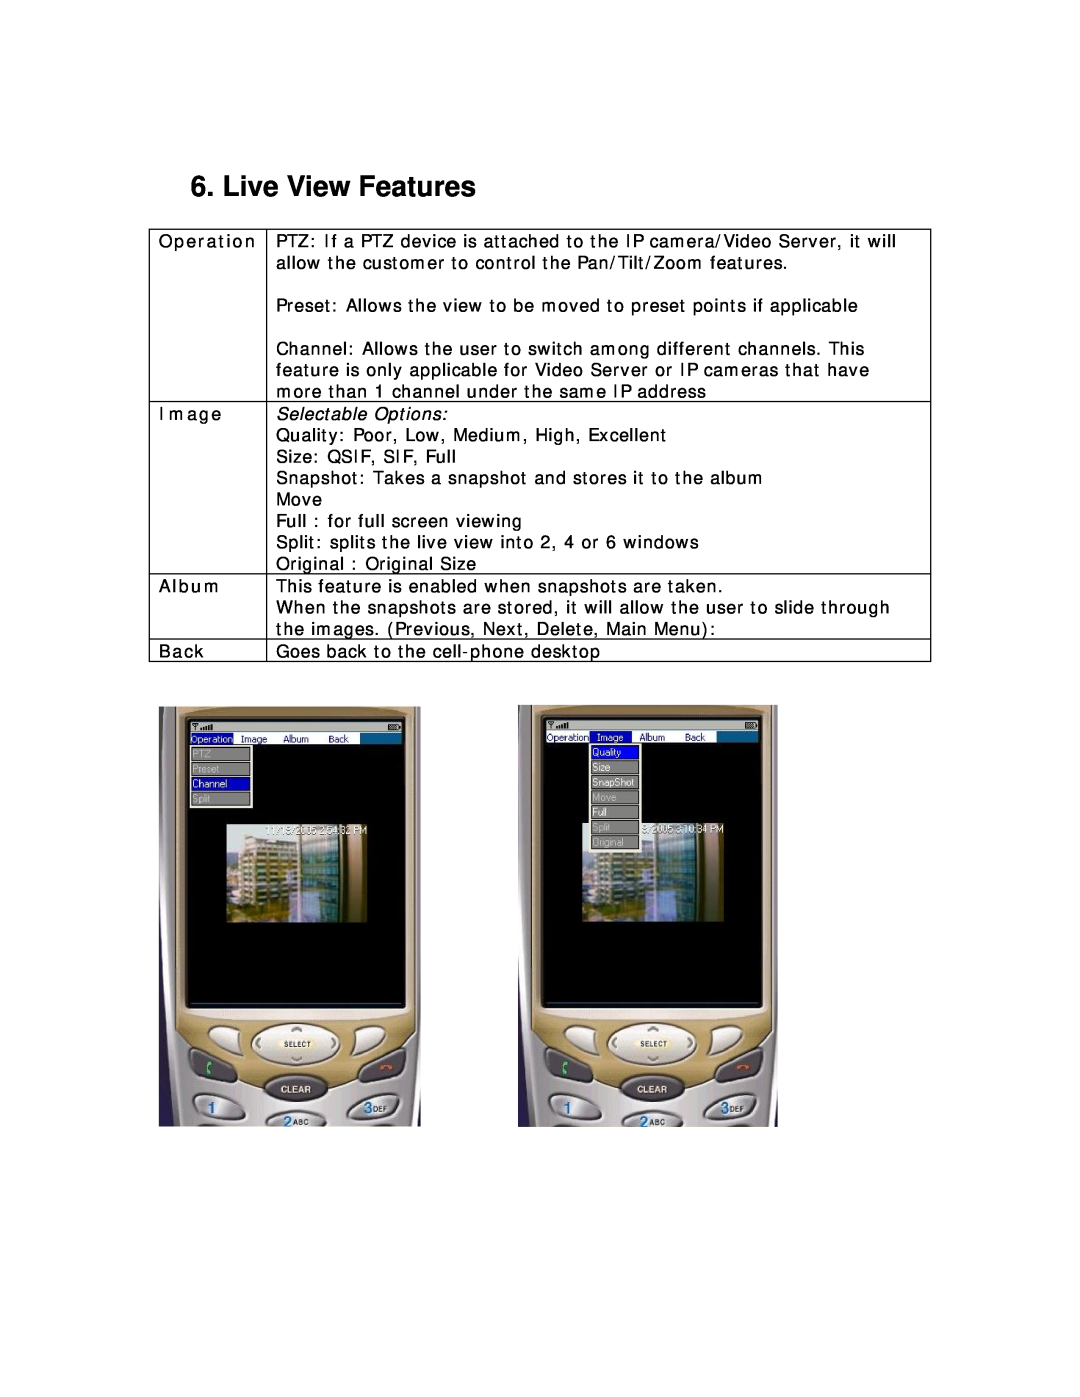 deXlan PiXORD user manual Live View Features, Operation, Image, Selectable Options, Album, Back 